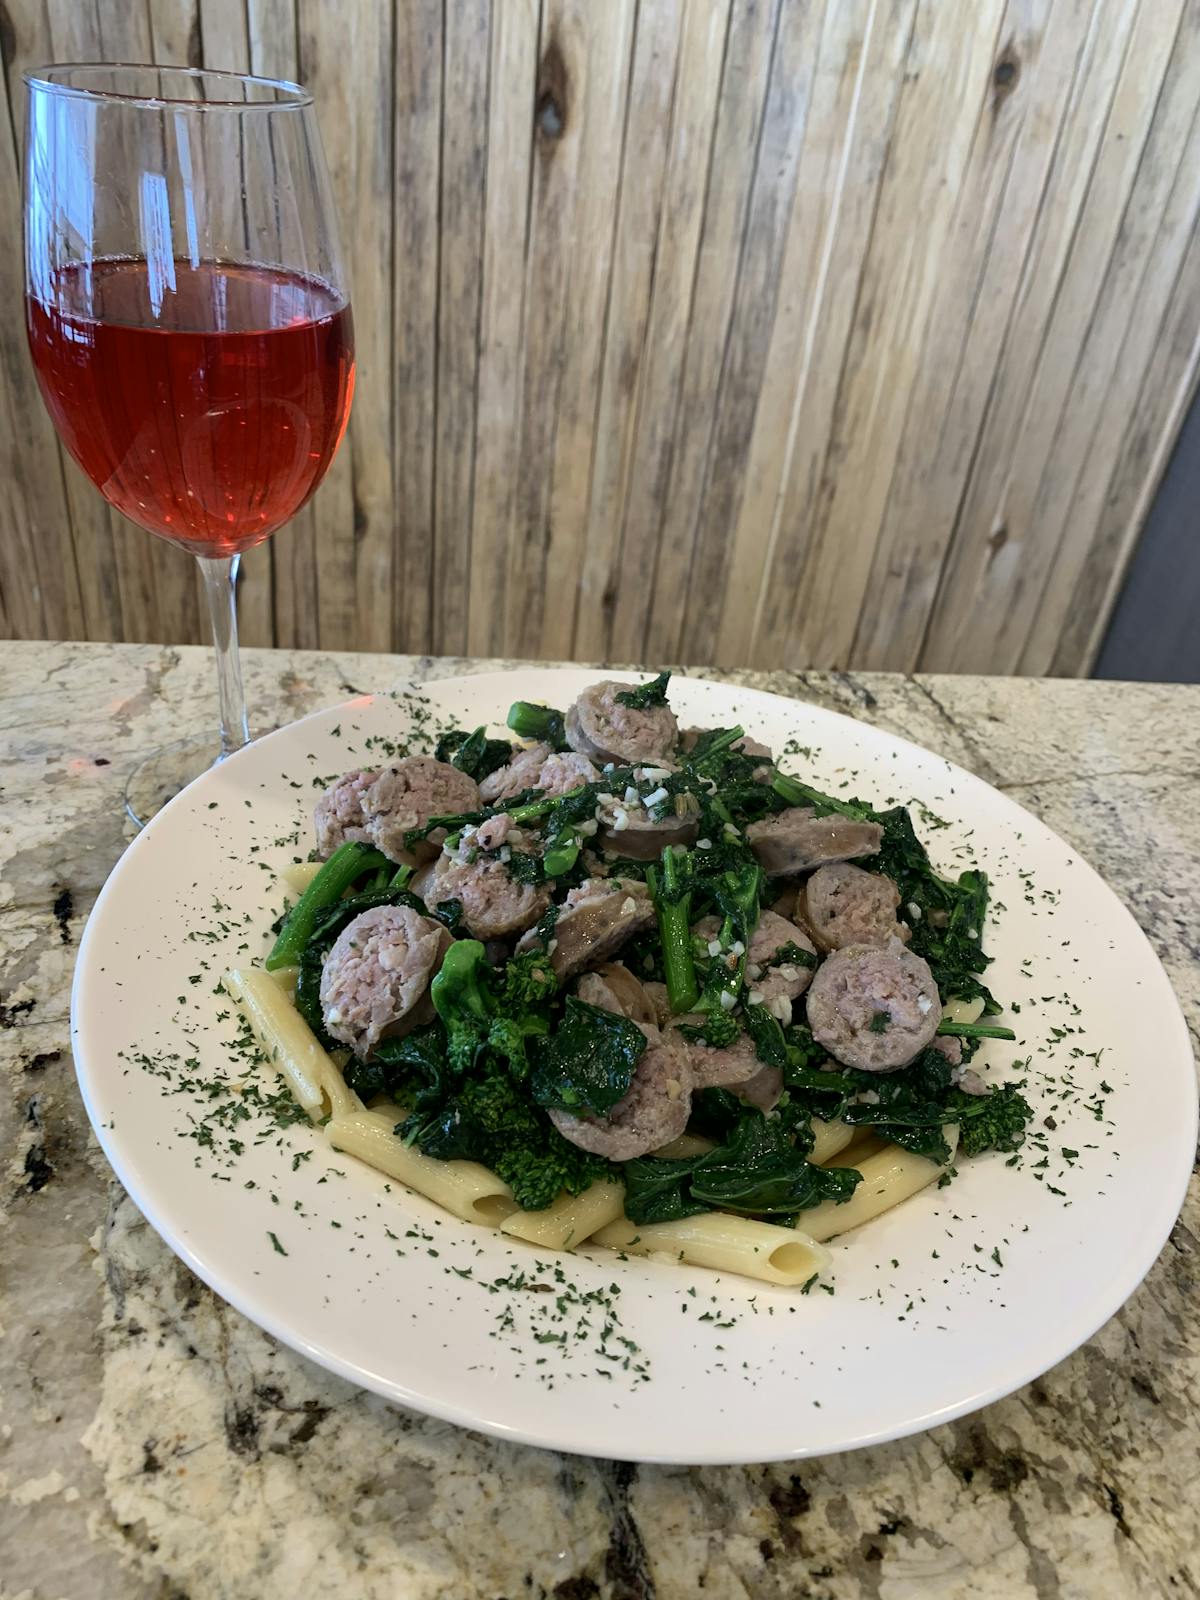 freshly made sausage from Meadow Meets. Tender broccoli rabe in a white Chablis sauce